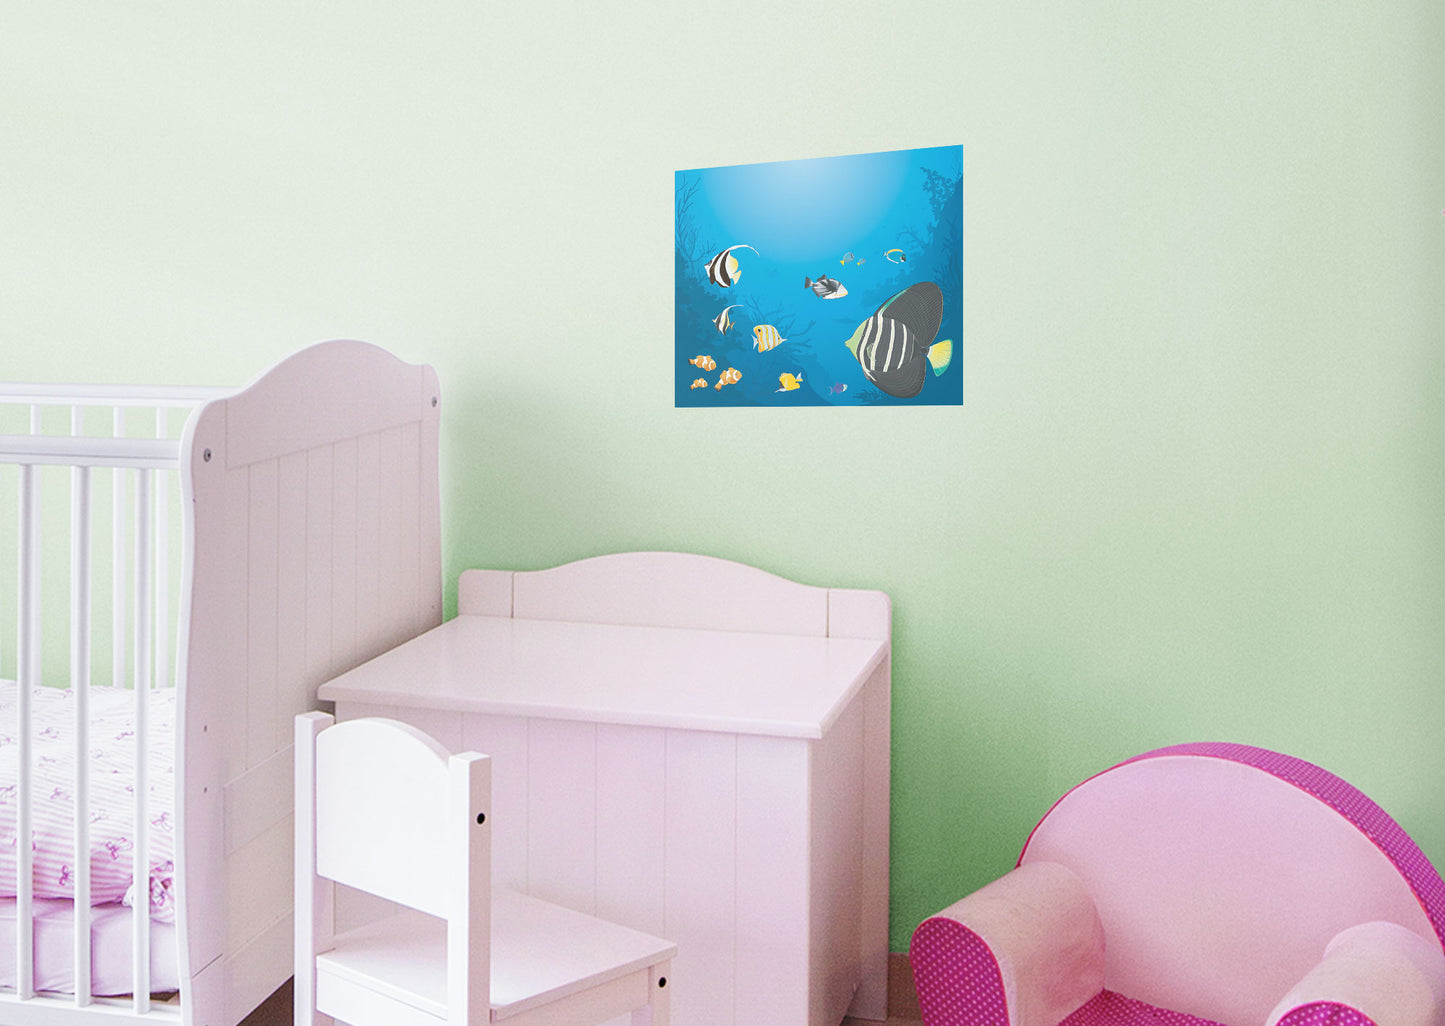 Nursery:  Quiet Mural        -   Removable Wall   Adhesive Decal